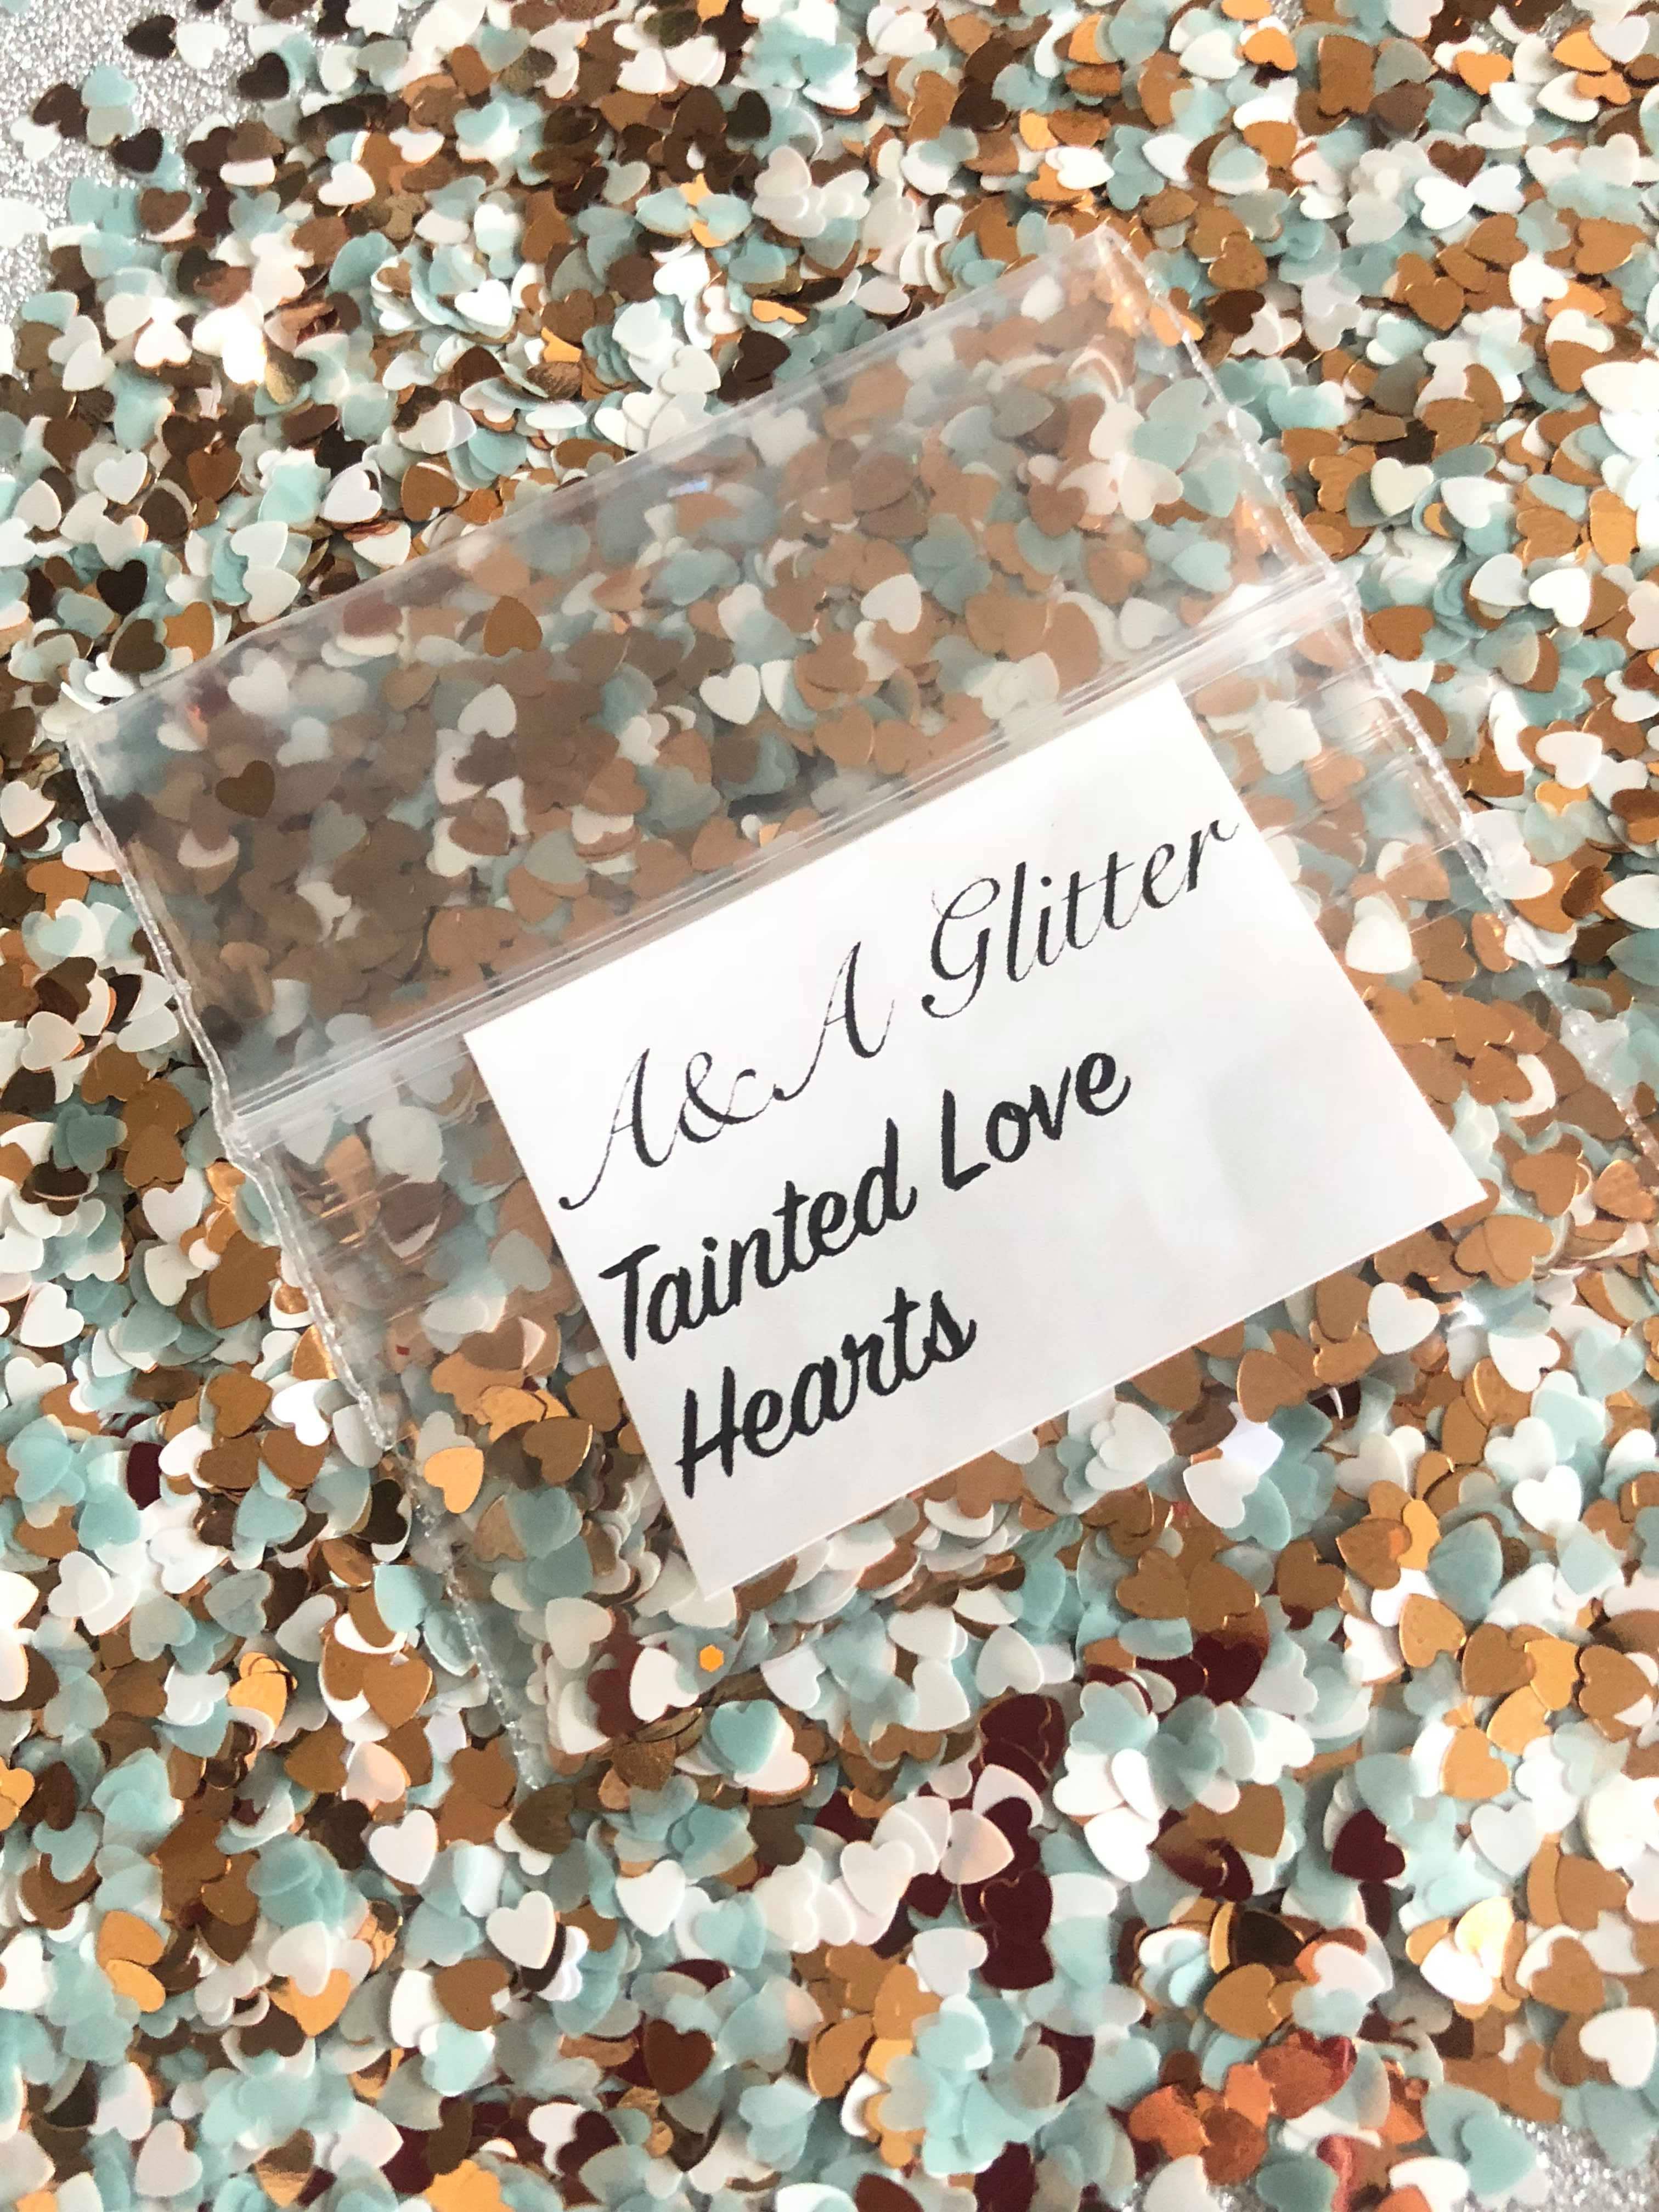 Tainted Love - A&A Glitter